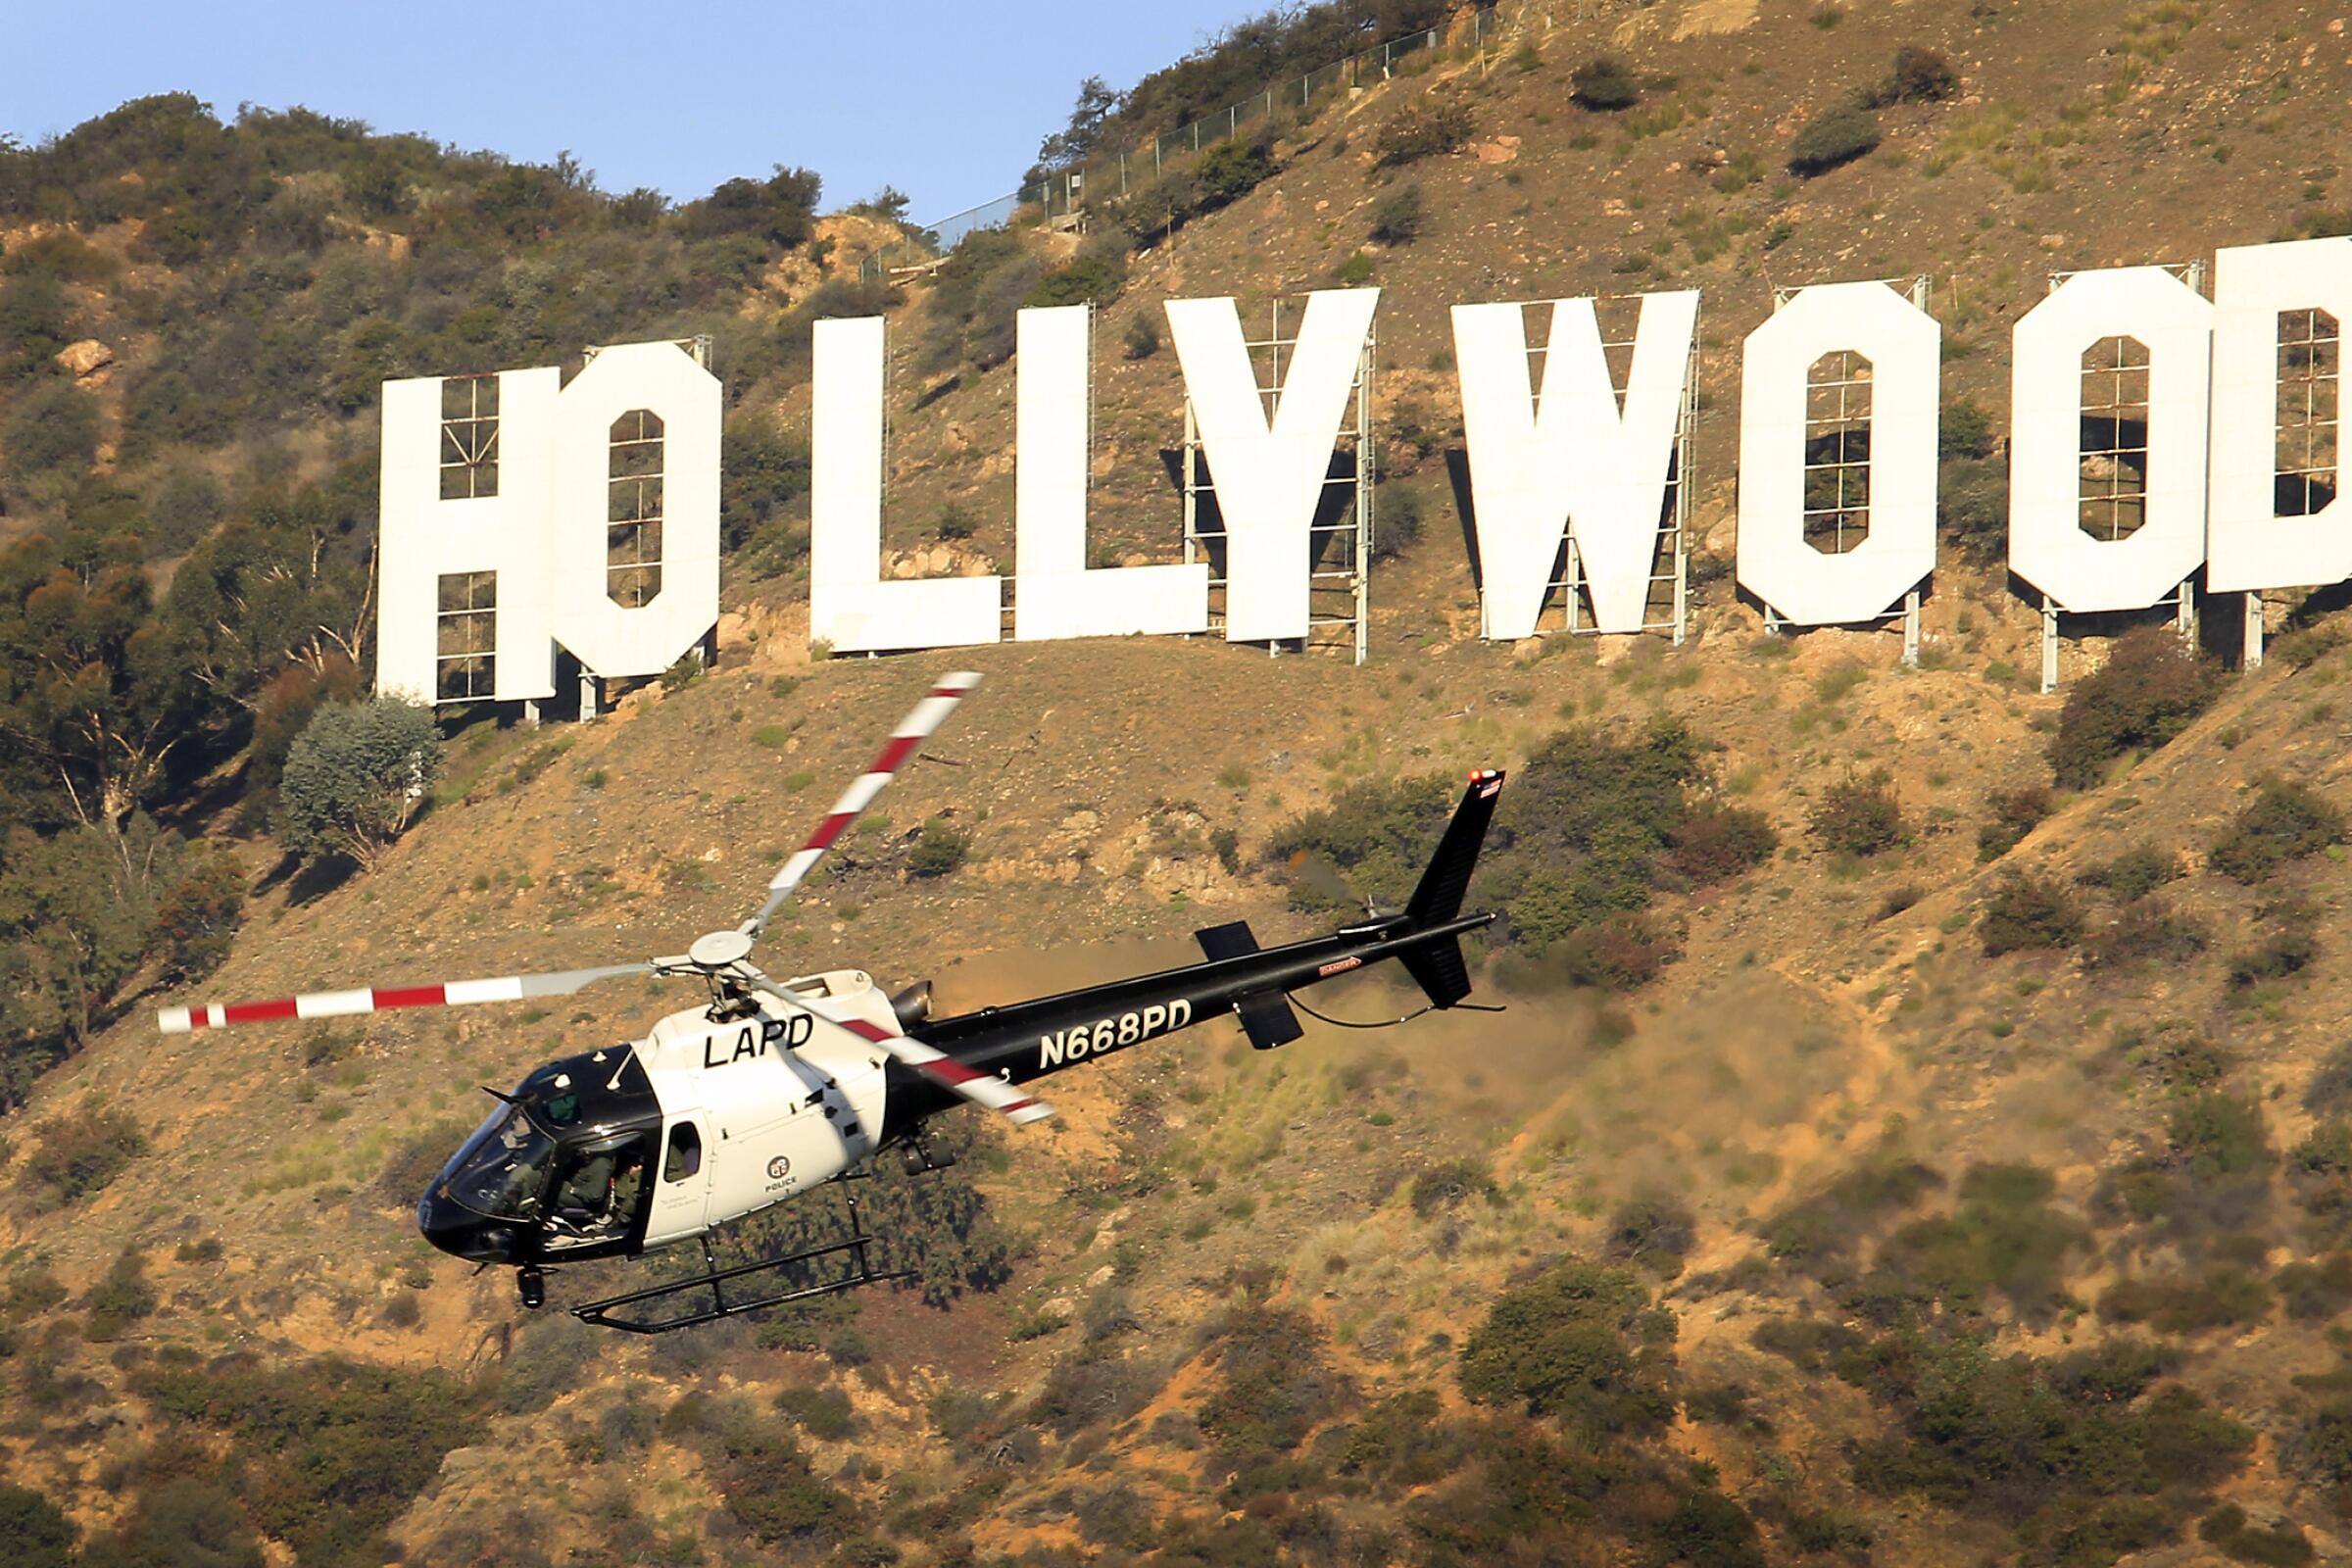 An LAPD helicopter